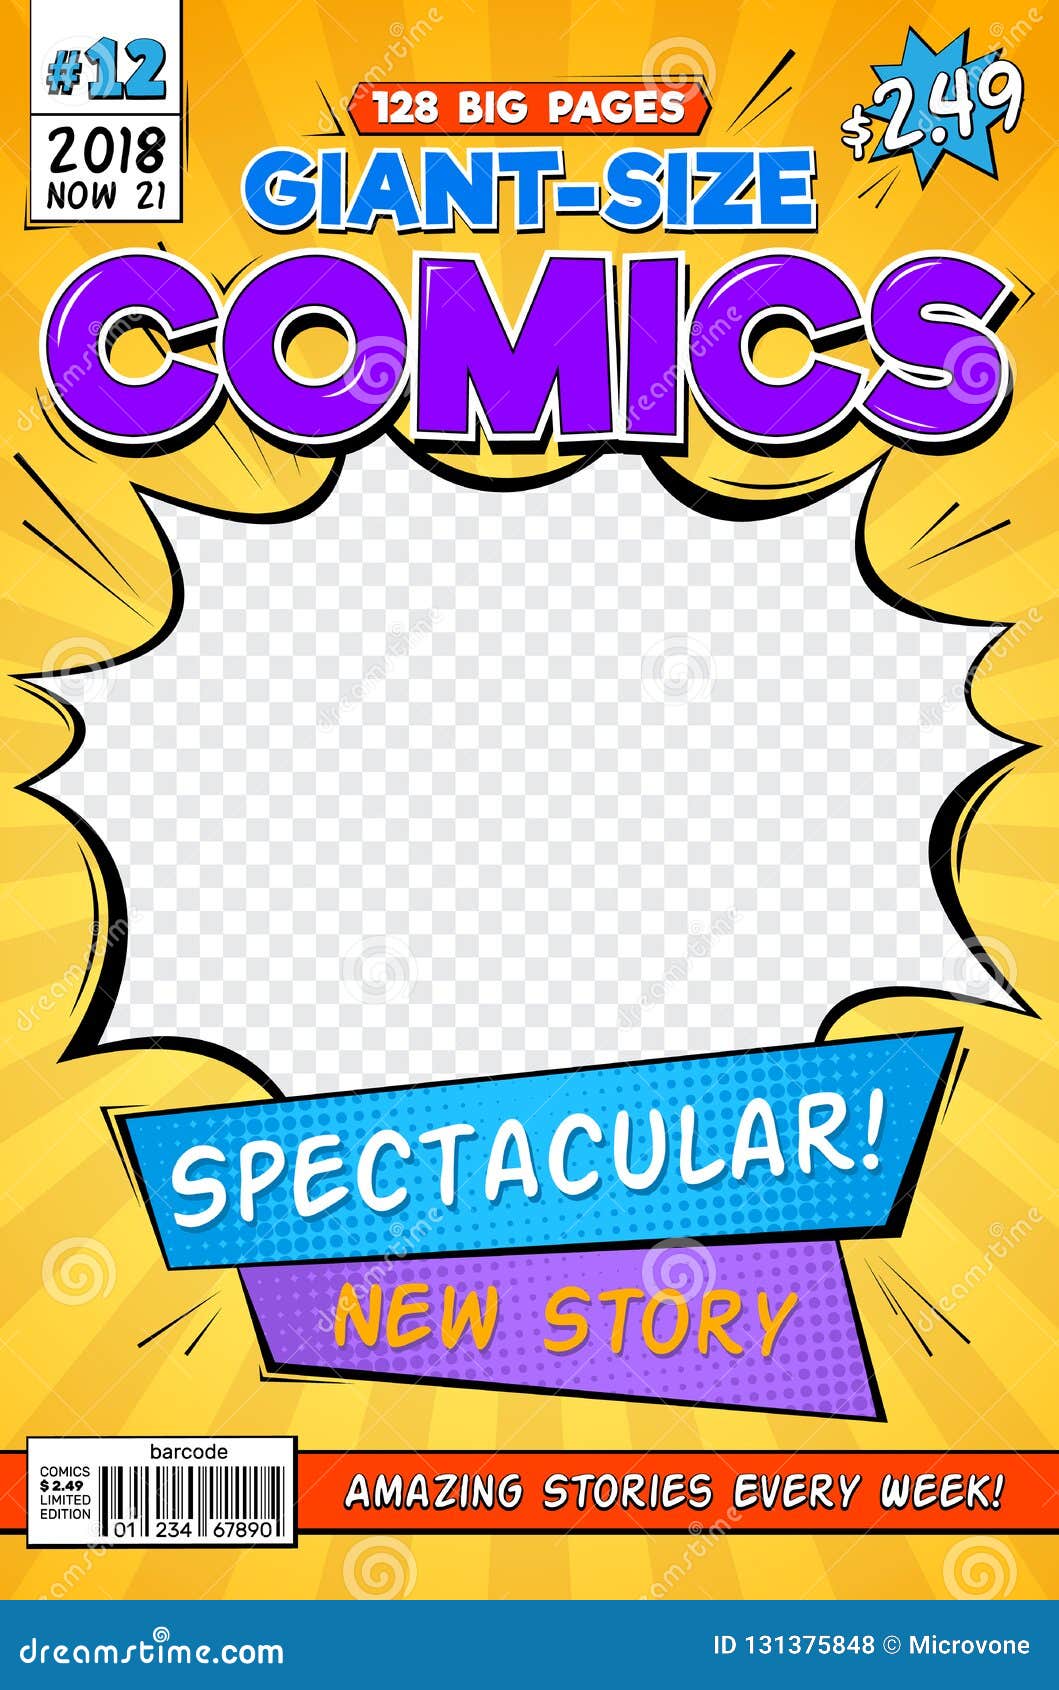 Comic Book Cover Vintage Comics Magazine Layout Cartoon Title Page Vector Template Stock Vector Illustration Of Colored Flyer 131375848